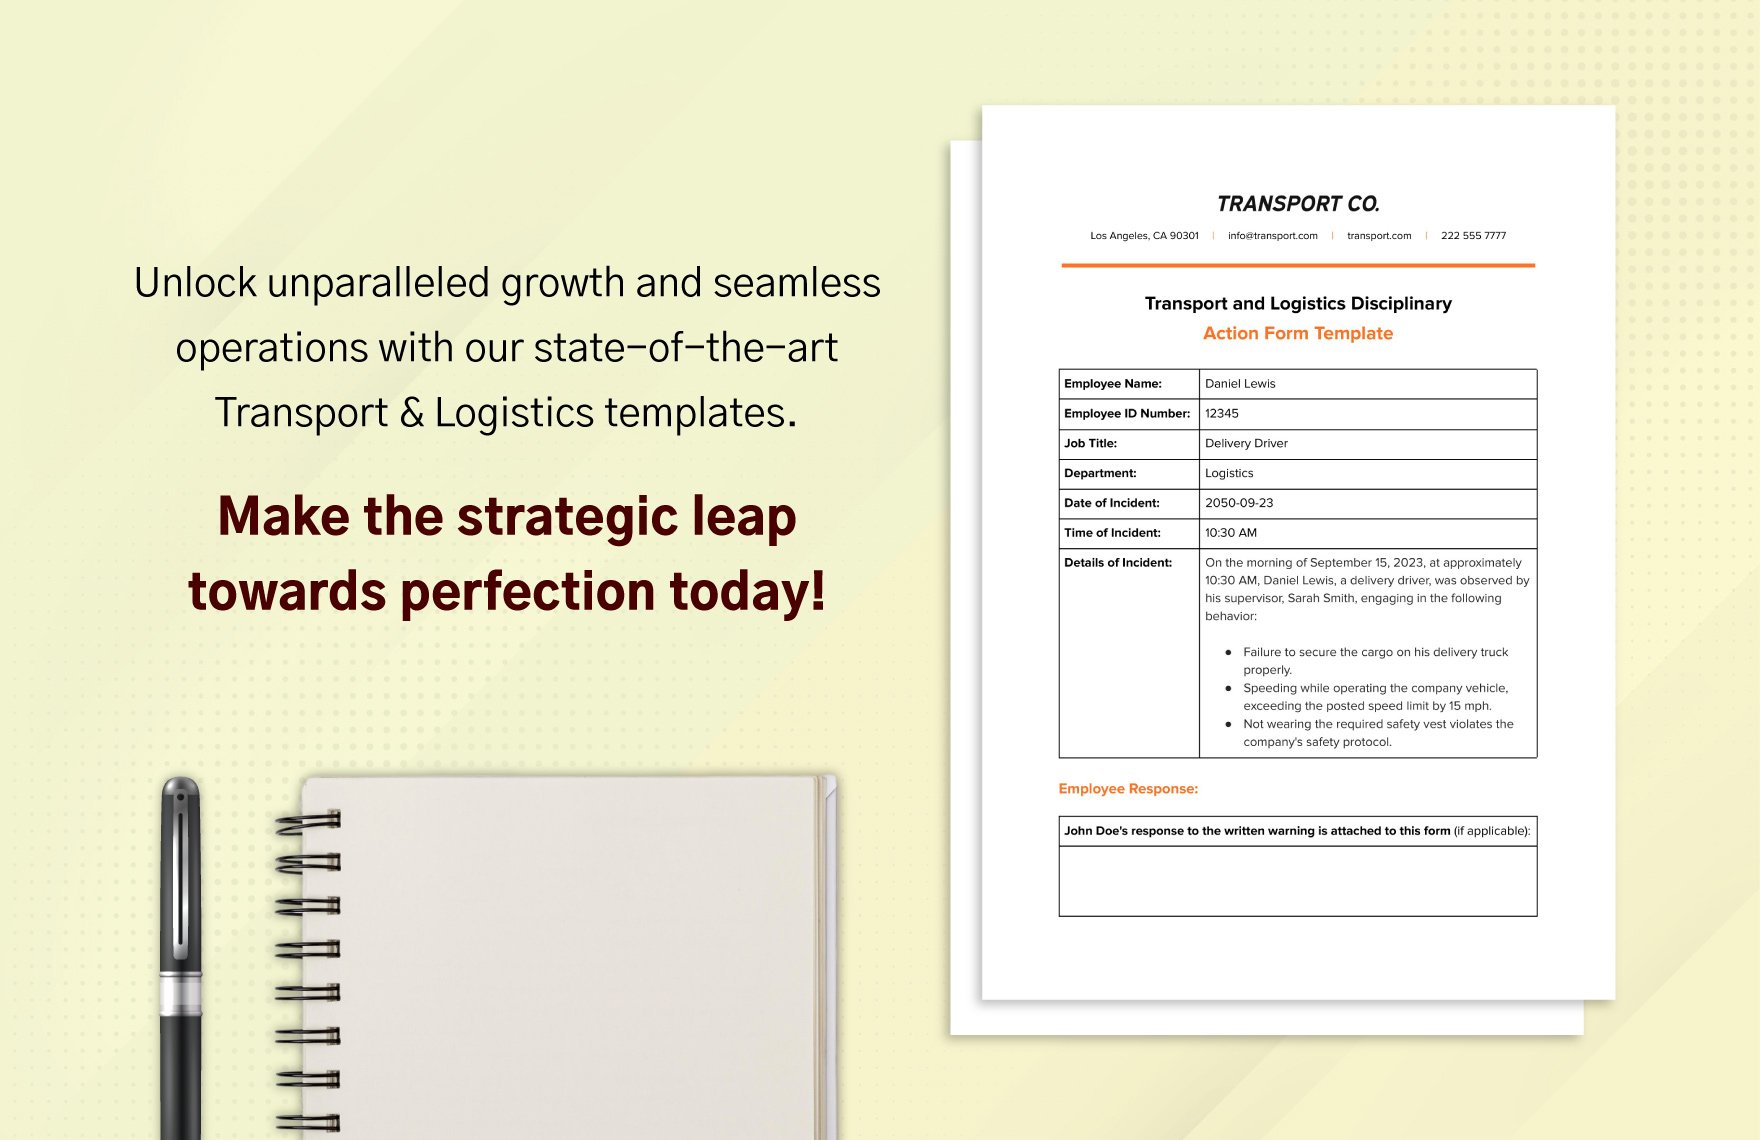 Transport and Logistics Disciplinary Action Form Template